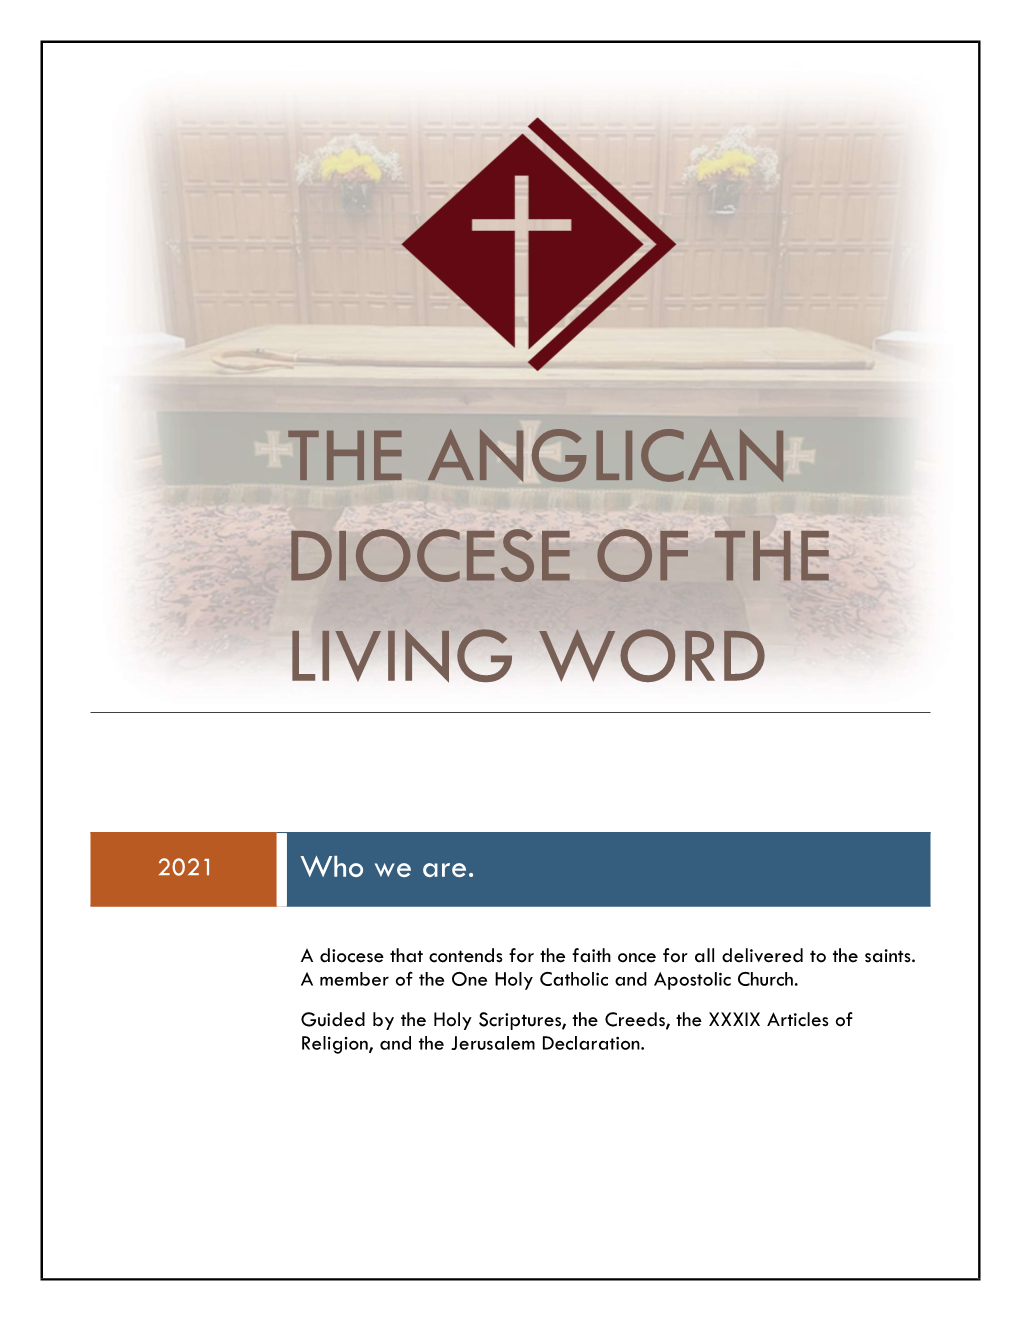 The Anglican Diocese of the Living Word